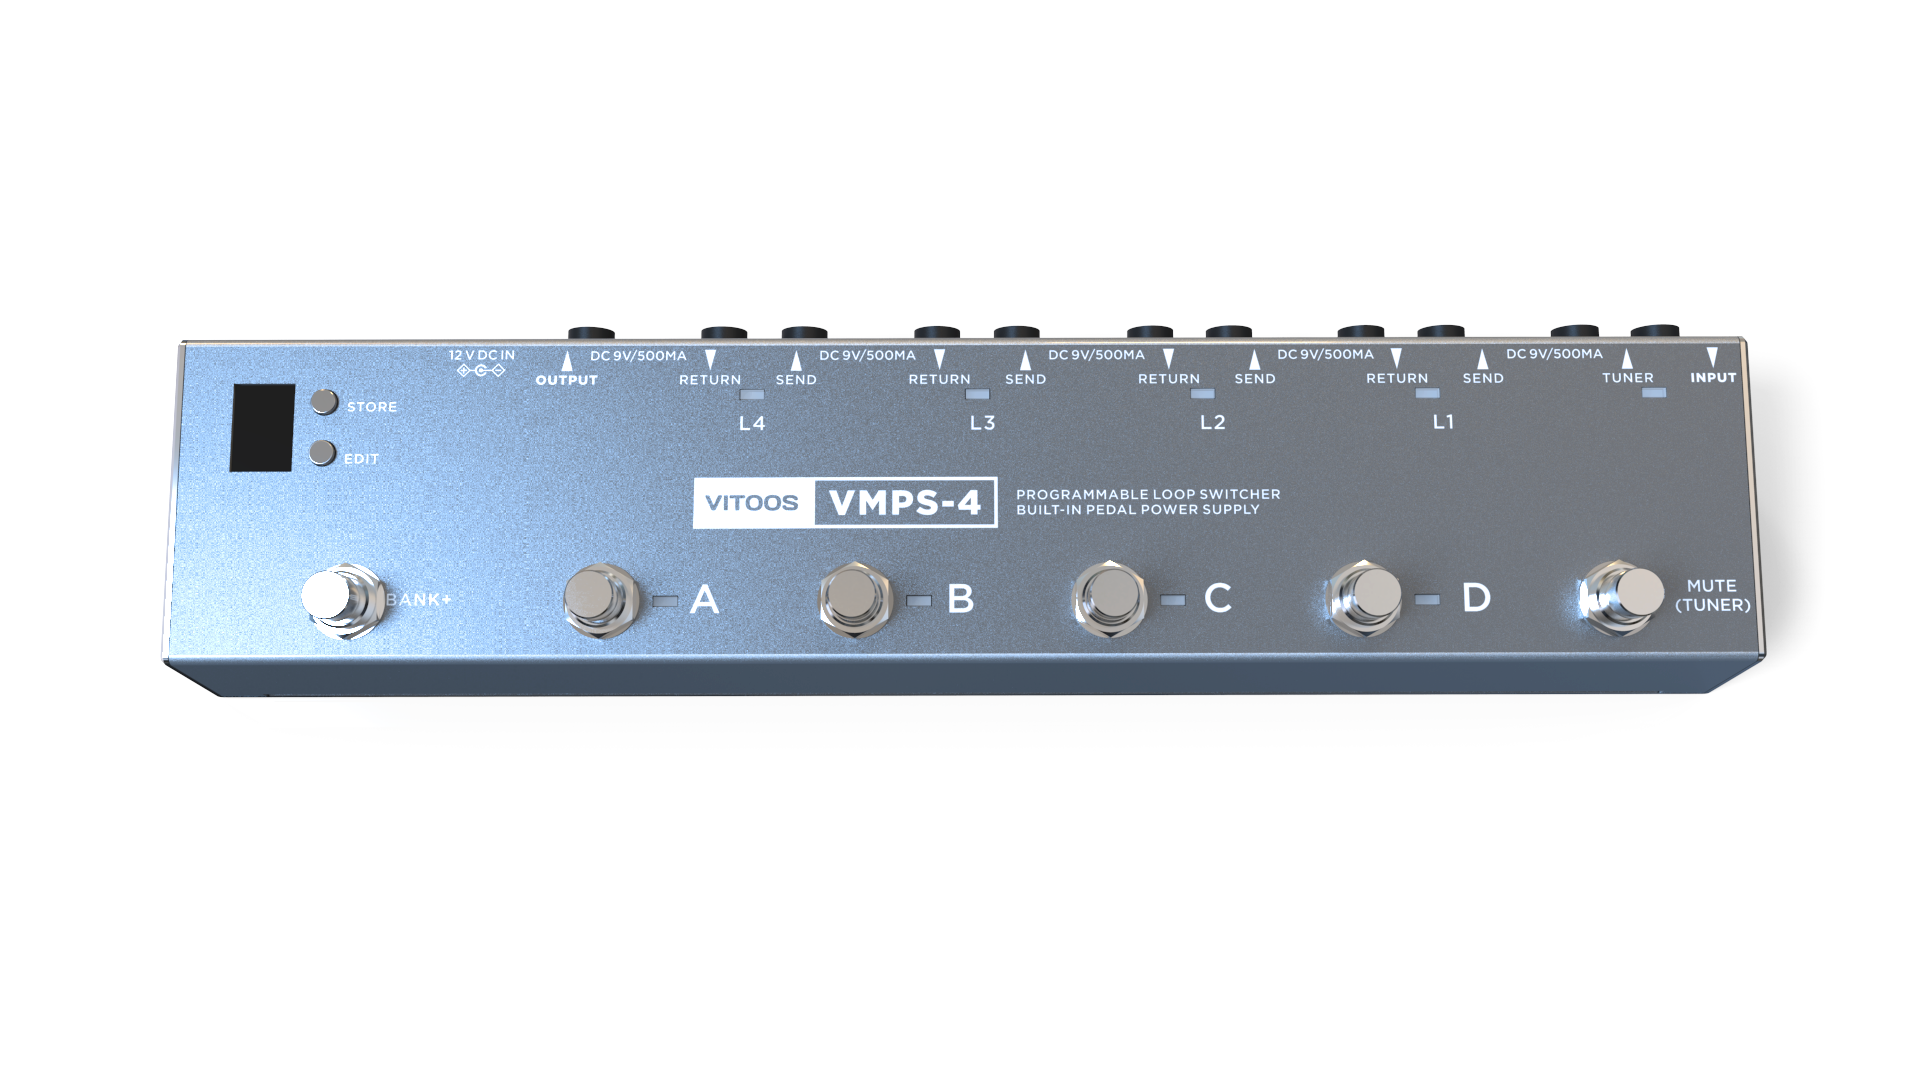 Vitoos VMPS-4 Progammer Loop Switcher Built-in Pedal Power Supply